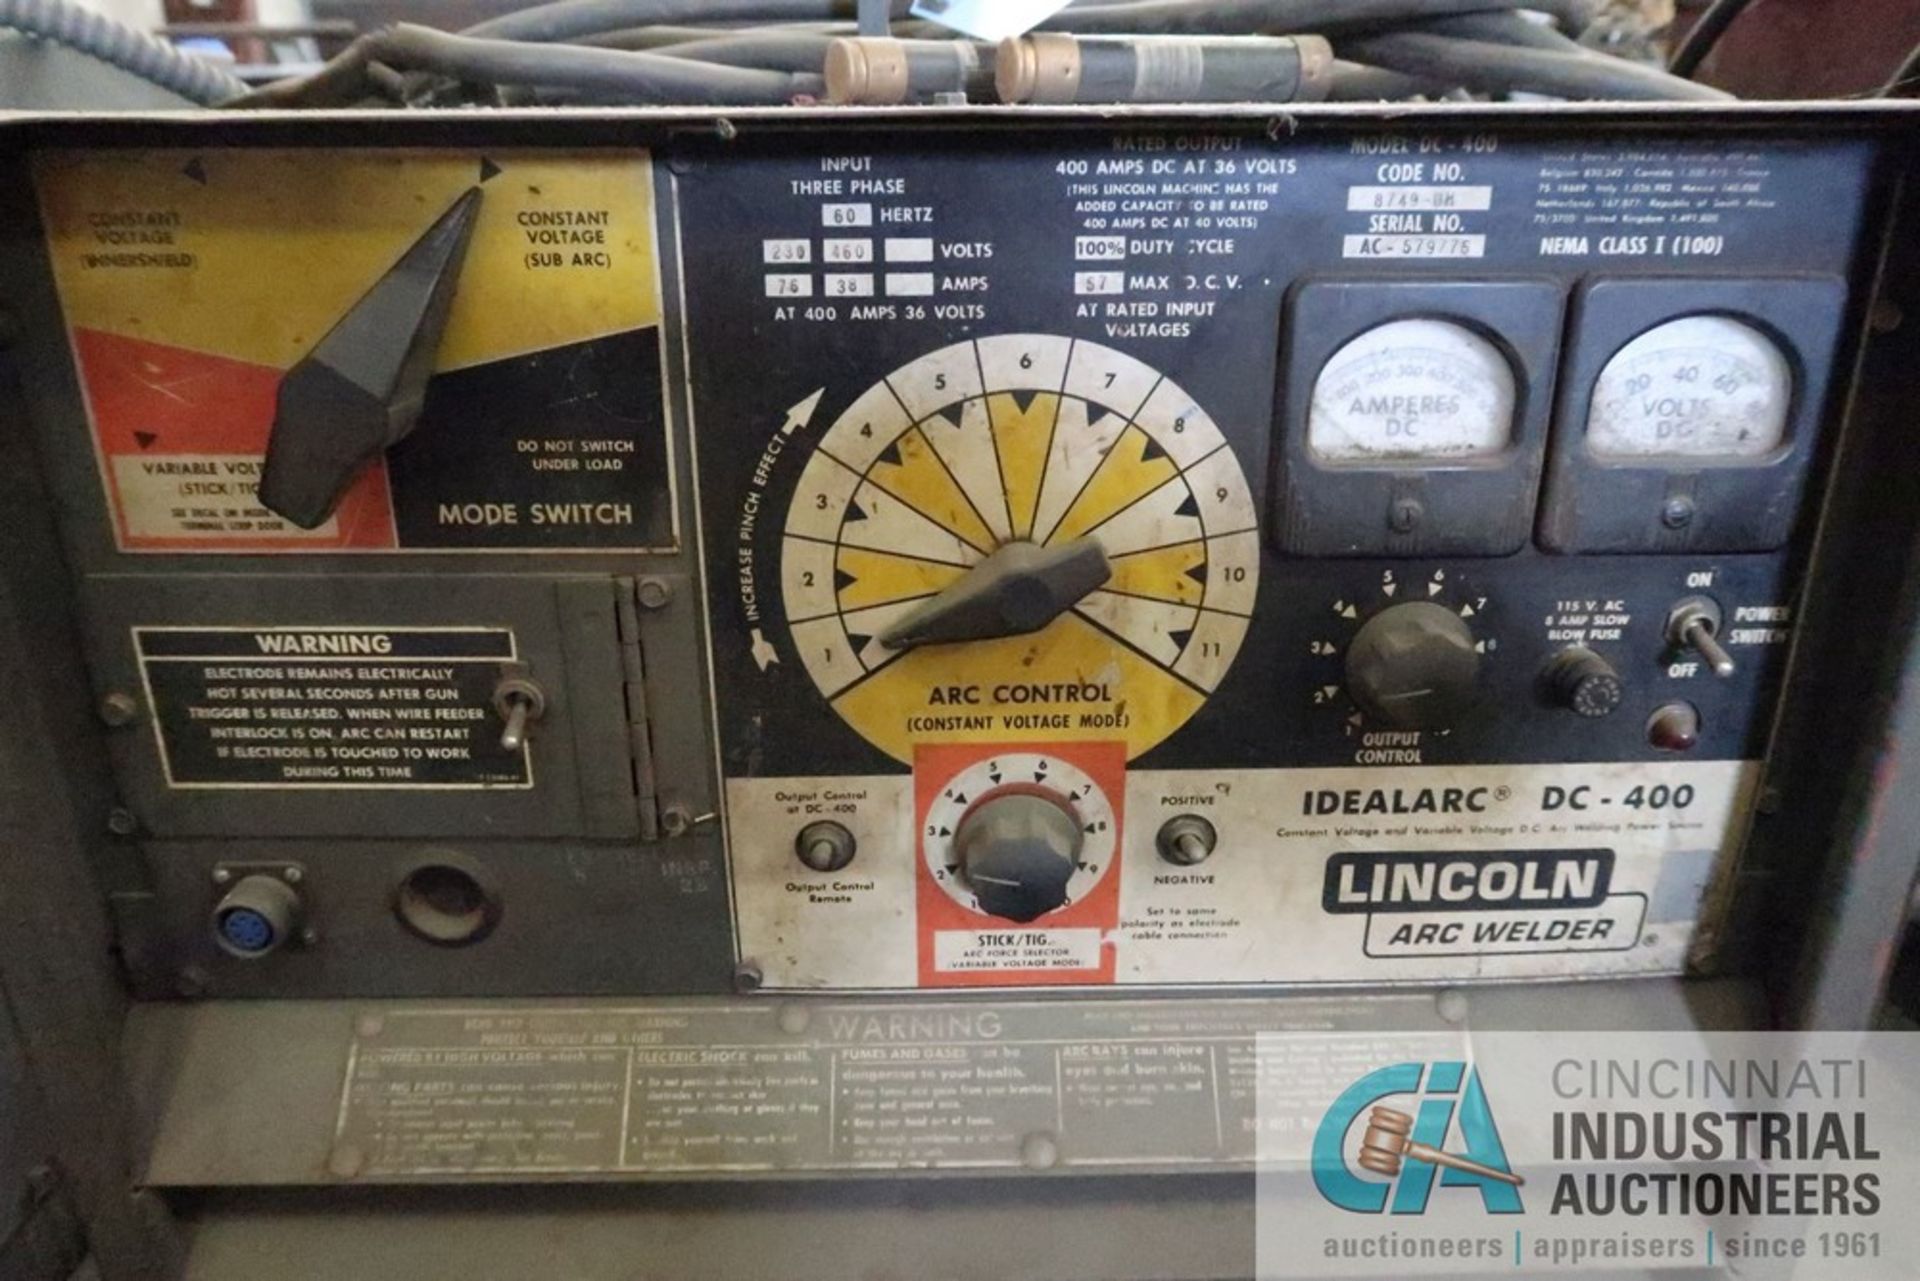 400 AMP LINCOLN ELECTRIC MODEL DC-400 ARC WELDING POWER SOURCE - Image 4 of 6